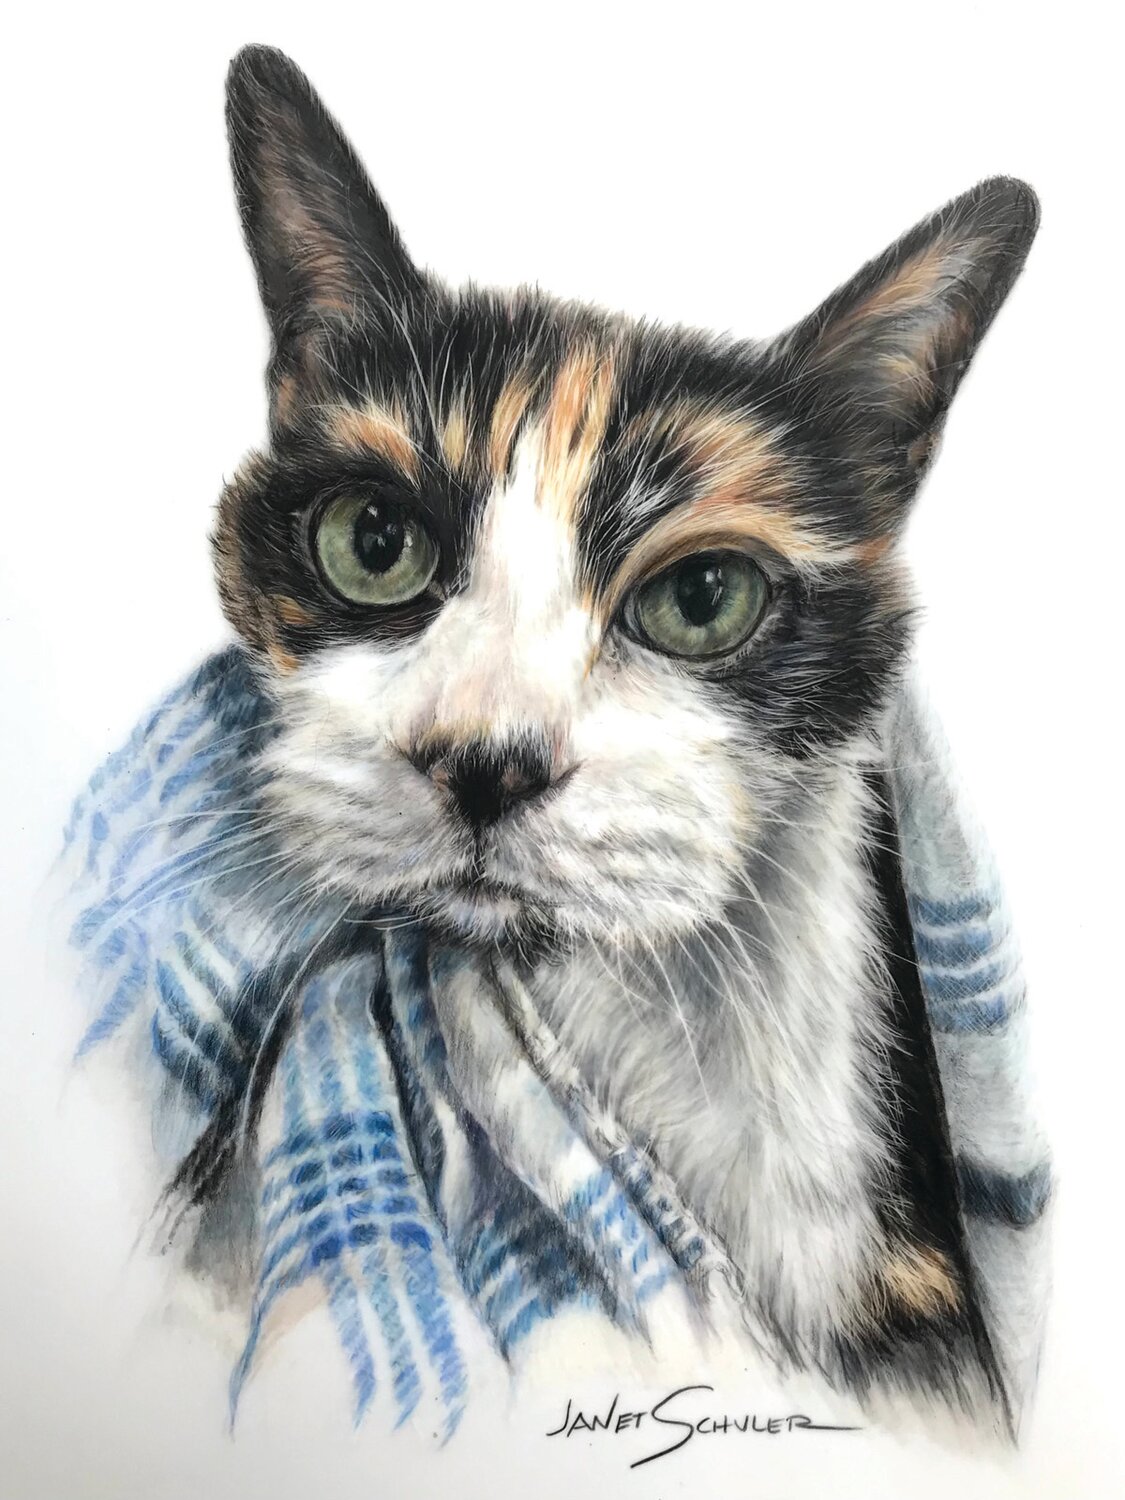 This portrait of “Libby” is a good example of how Janet Schuler, of Warrington, channels an animal’s personality so her drawing will thrill the pet’s owner.